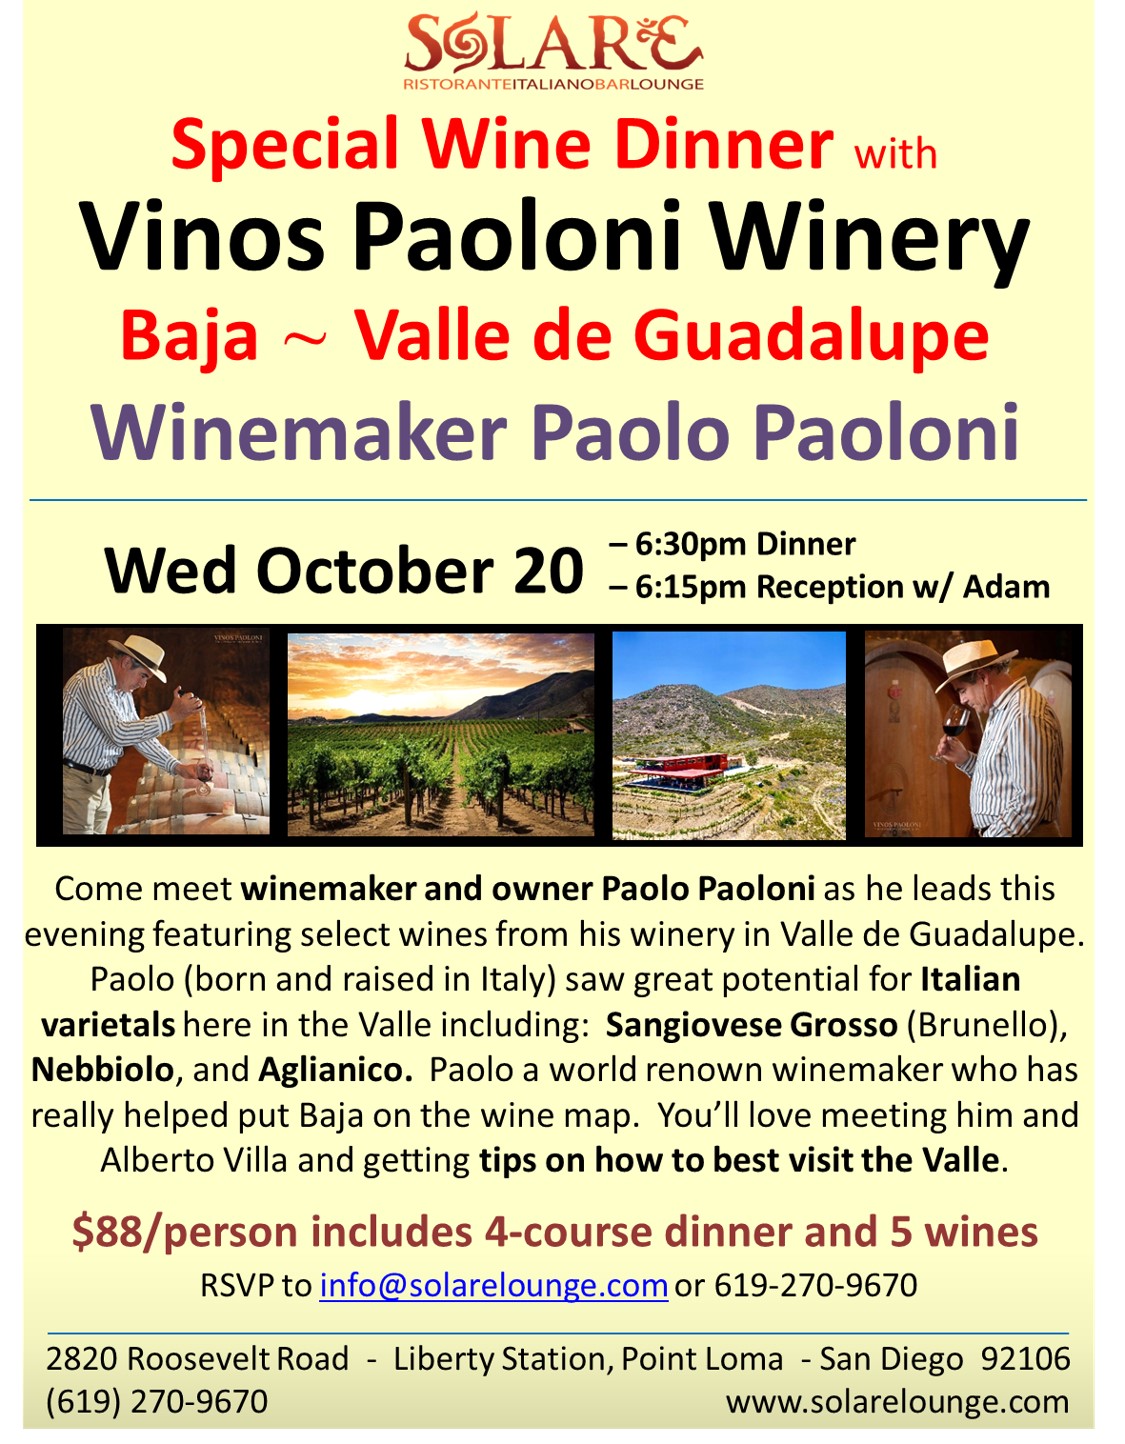 <a id="Solare-Paoloni-Wine-Dinner"></a>Solare Wine Dinner with Paolo Paoloni - Baja Valle de Guadalupe